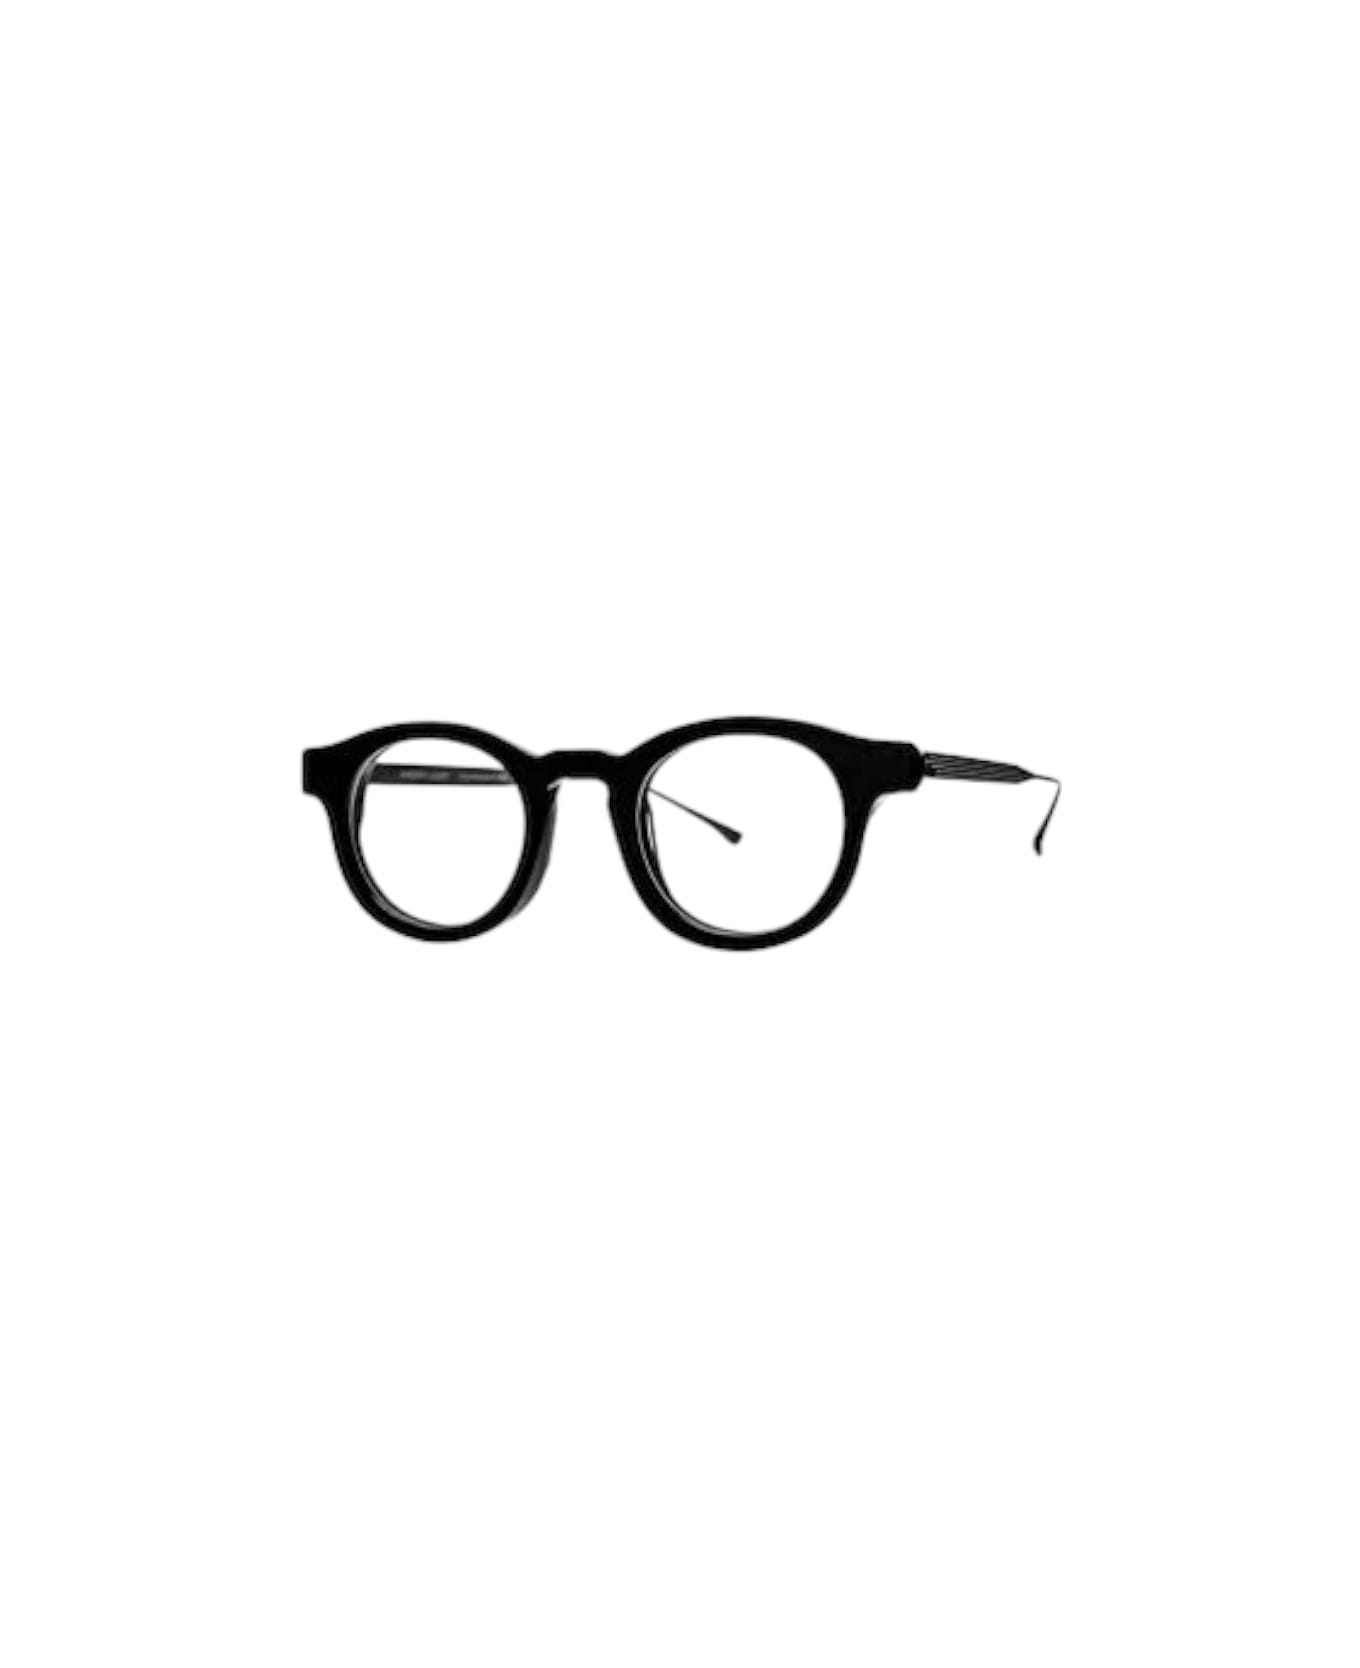 Thierry Lasry Mentaly Glasses